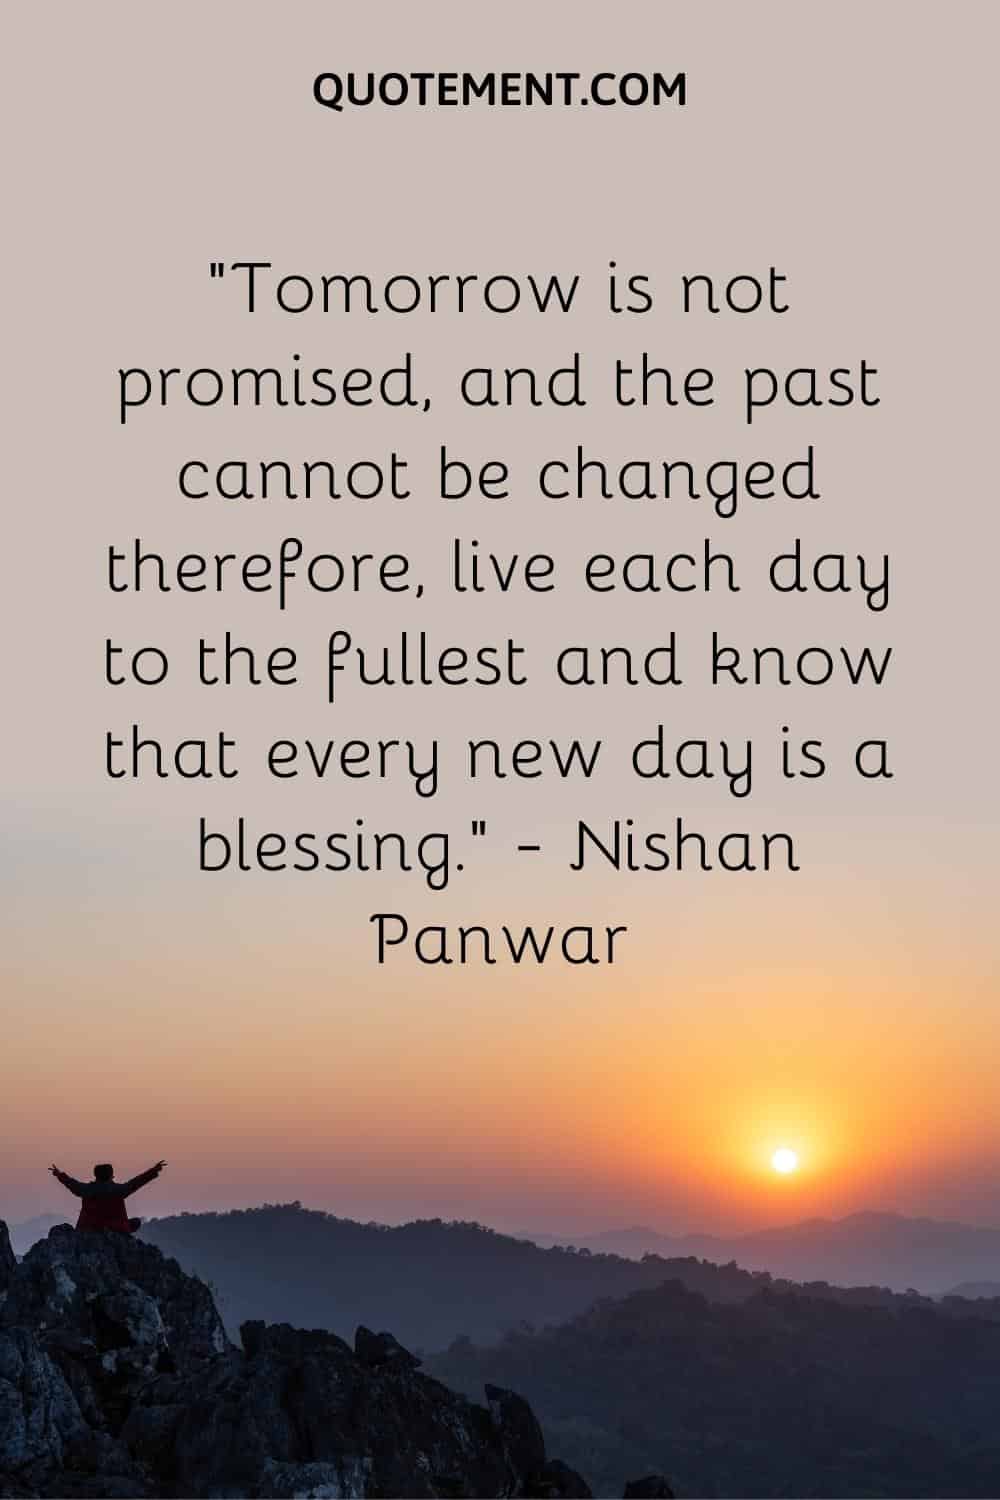 Tomorrow is not promised, and the past cannot be changed therefore, live each day to the fullest and know that every new day is a blessing